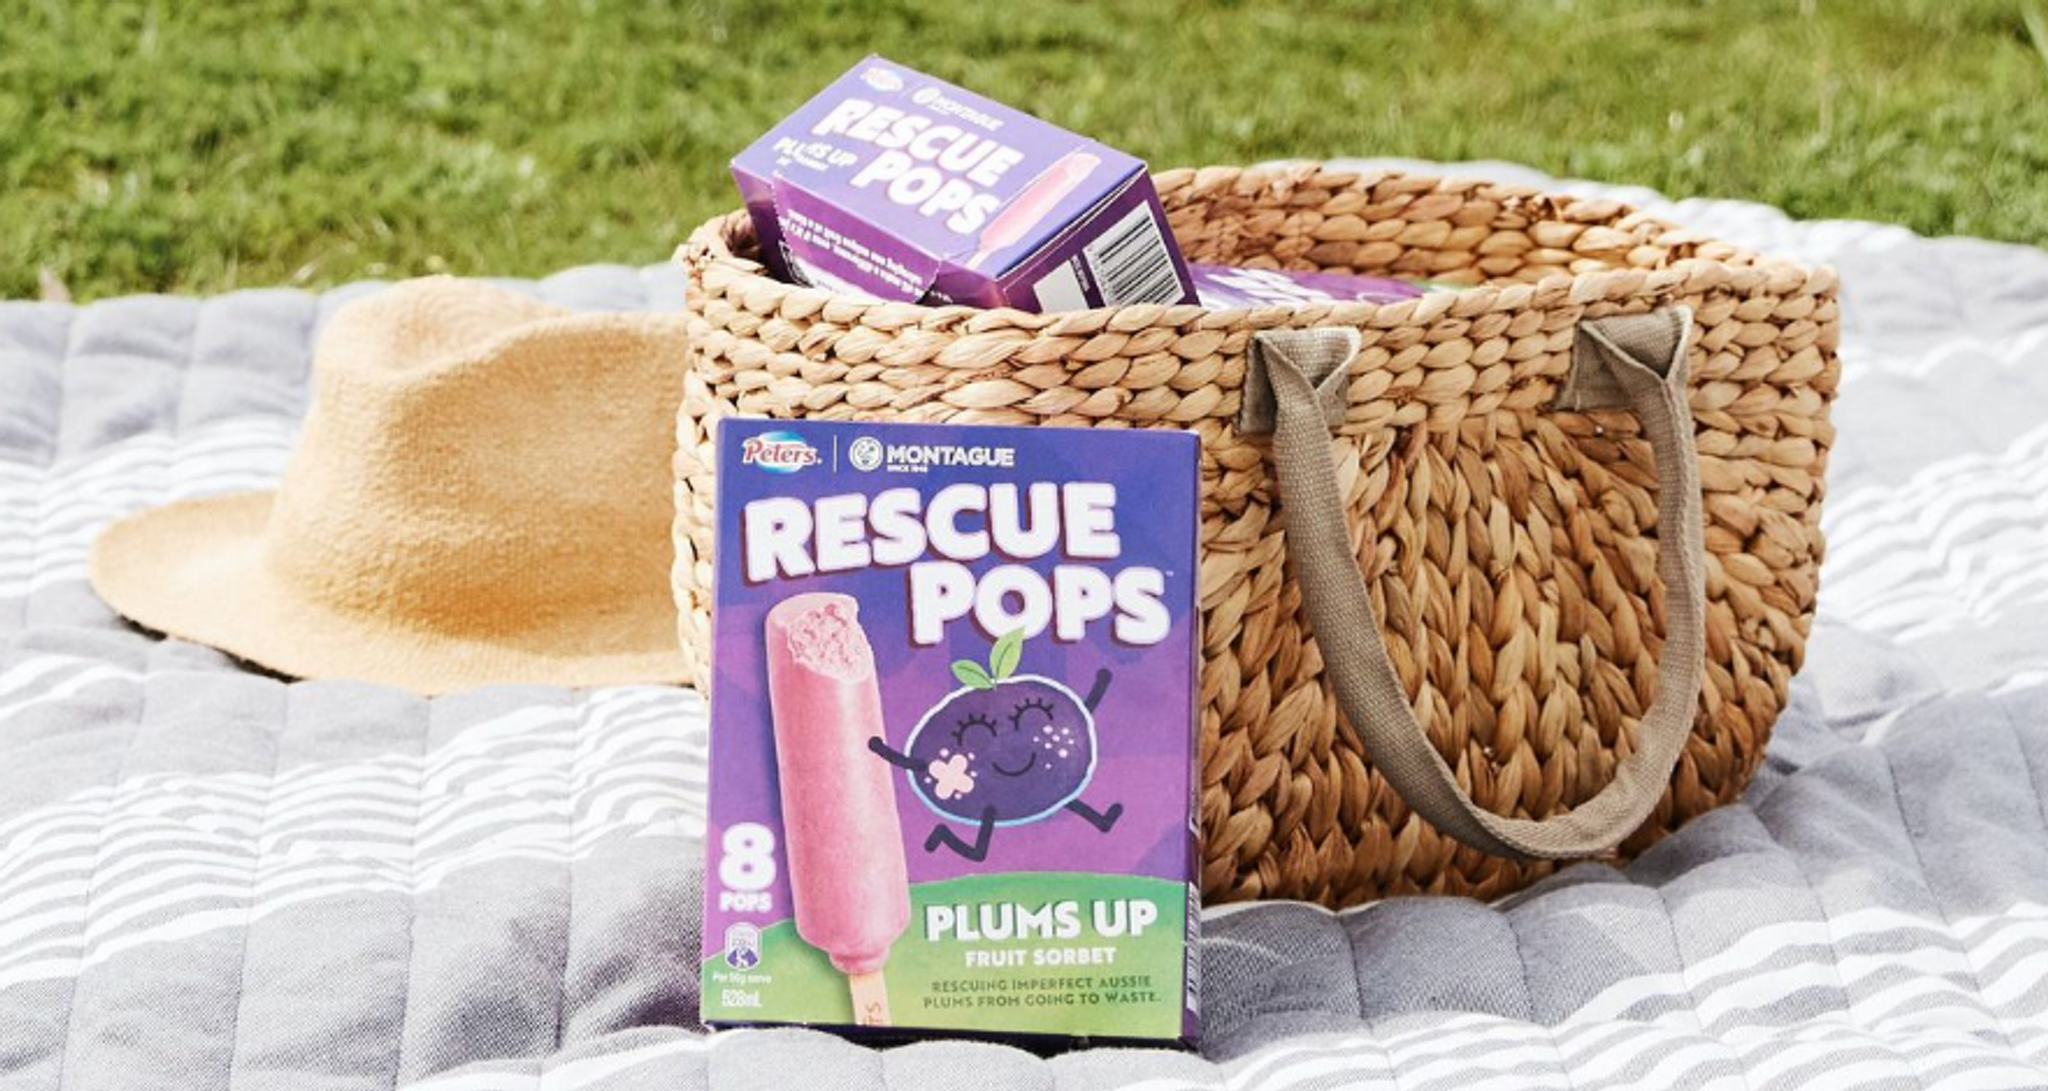 Rescue Pops save fruit from landfills in Australia